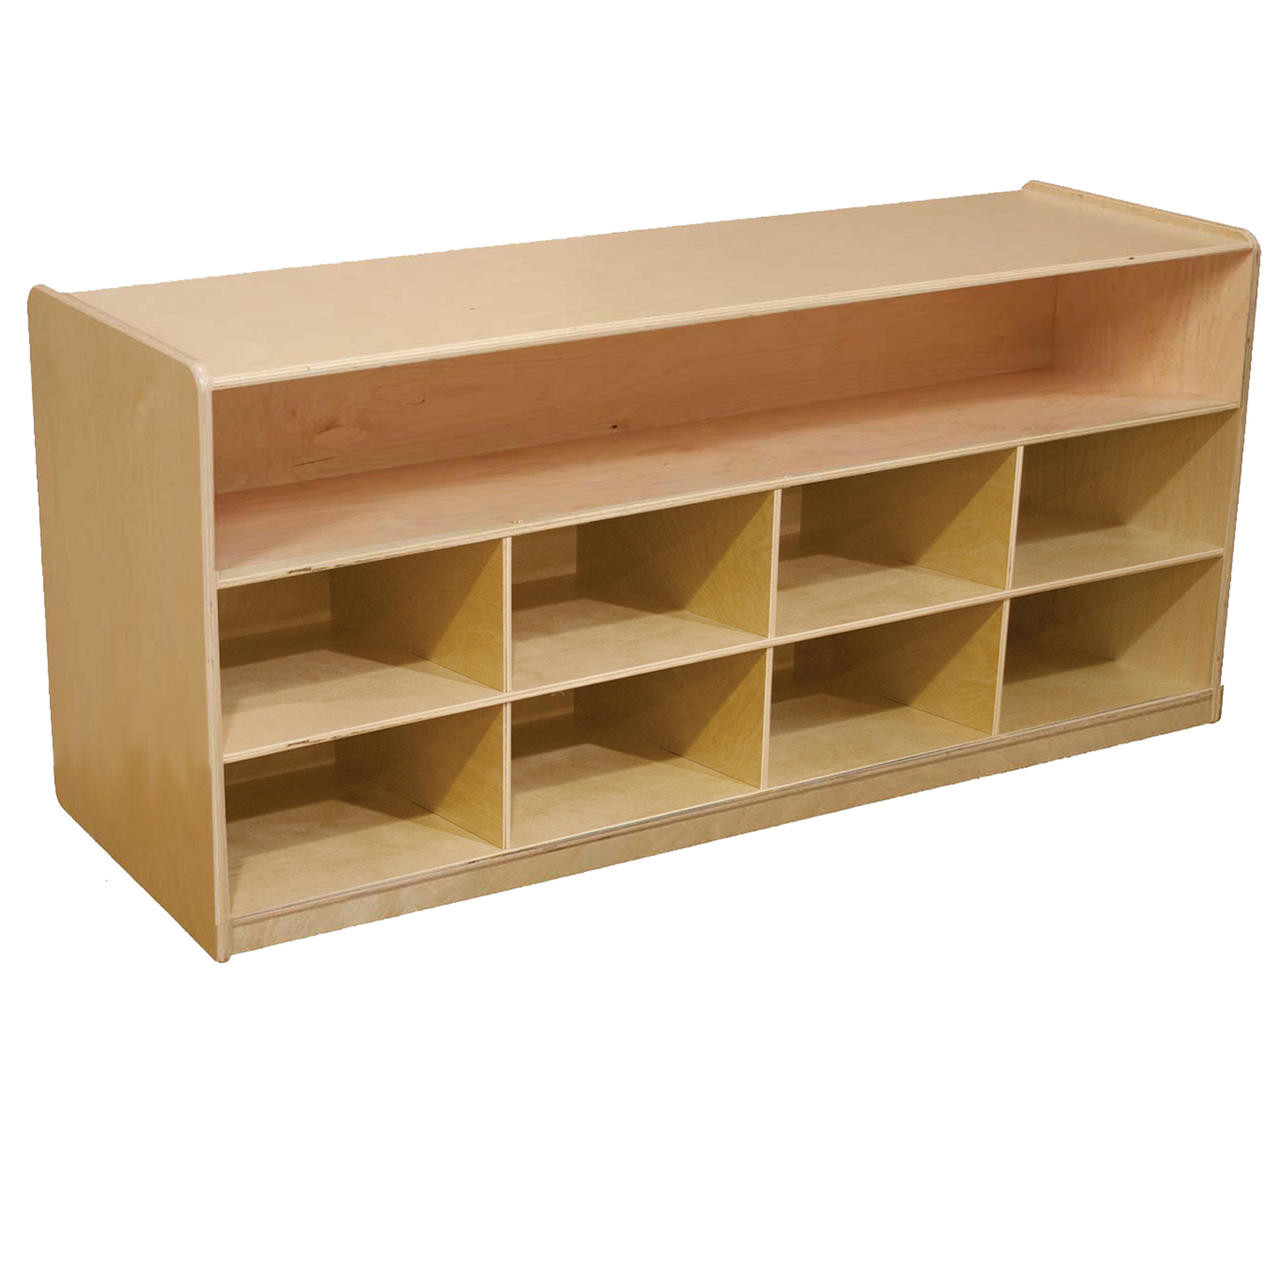 https://cdn11.bigcommerce.com/s-kd3y7/images/stencil/1280x1280/products/1139/55710/wood-designs-wd99609ct-low-storage-unit-with-8-translucent-trays__60764.1646324193.jpg?c=2